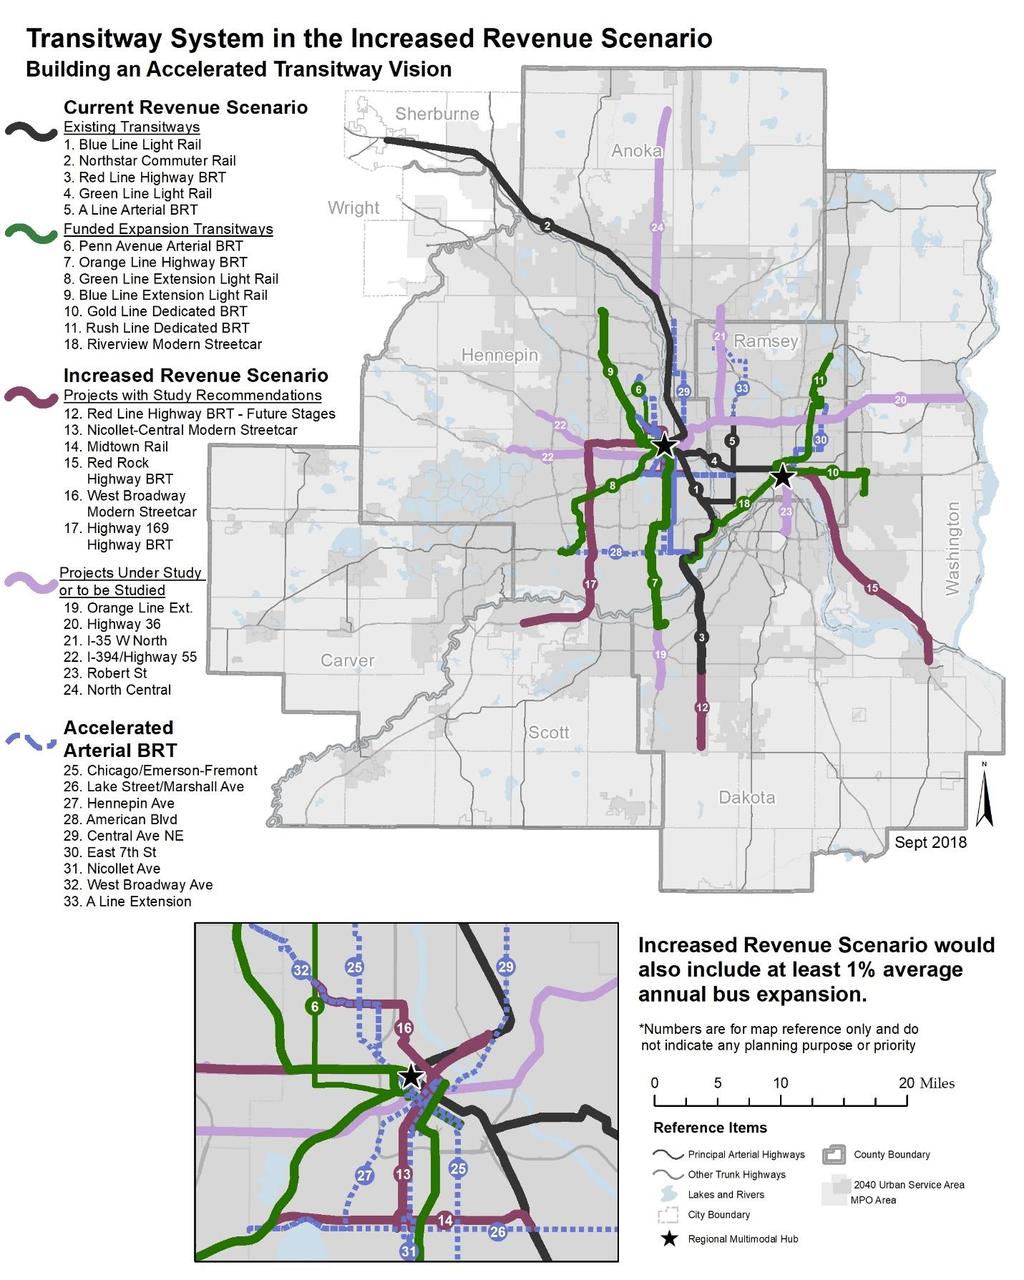 Revised Figure 6-9: Map of Transitway System in an Increased Revenue Scenario Building an Accelerated Transitway